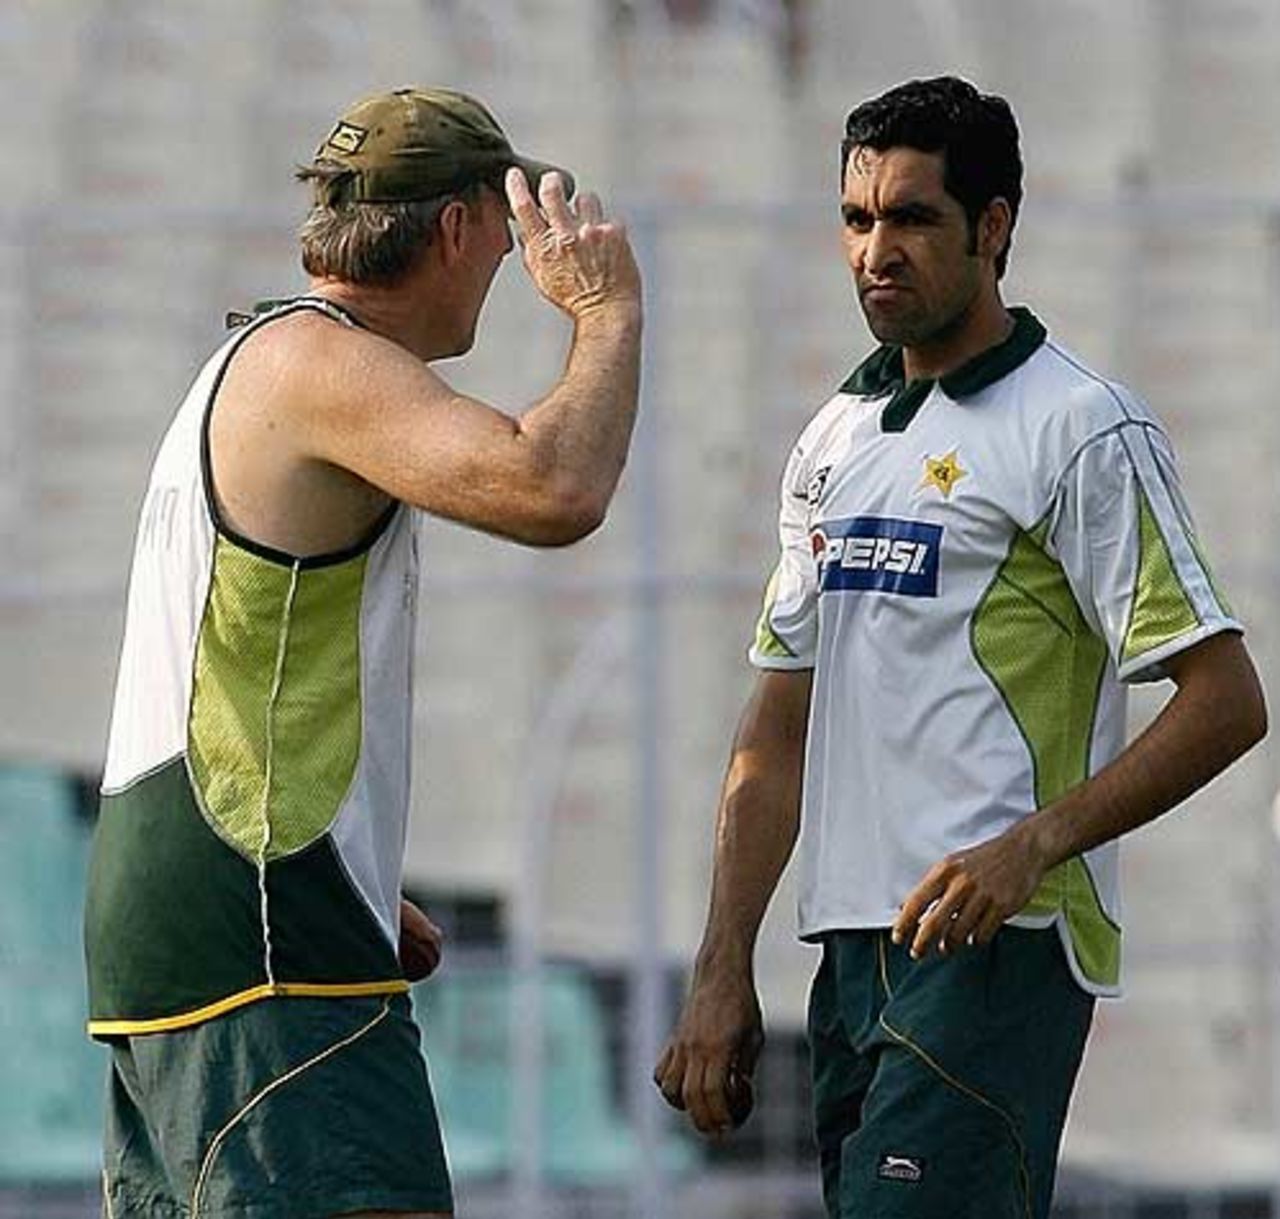 Advice from the coach as Umar Gul practices in the nets, Kolkata, November 28. 2007